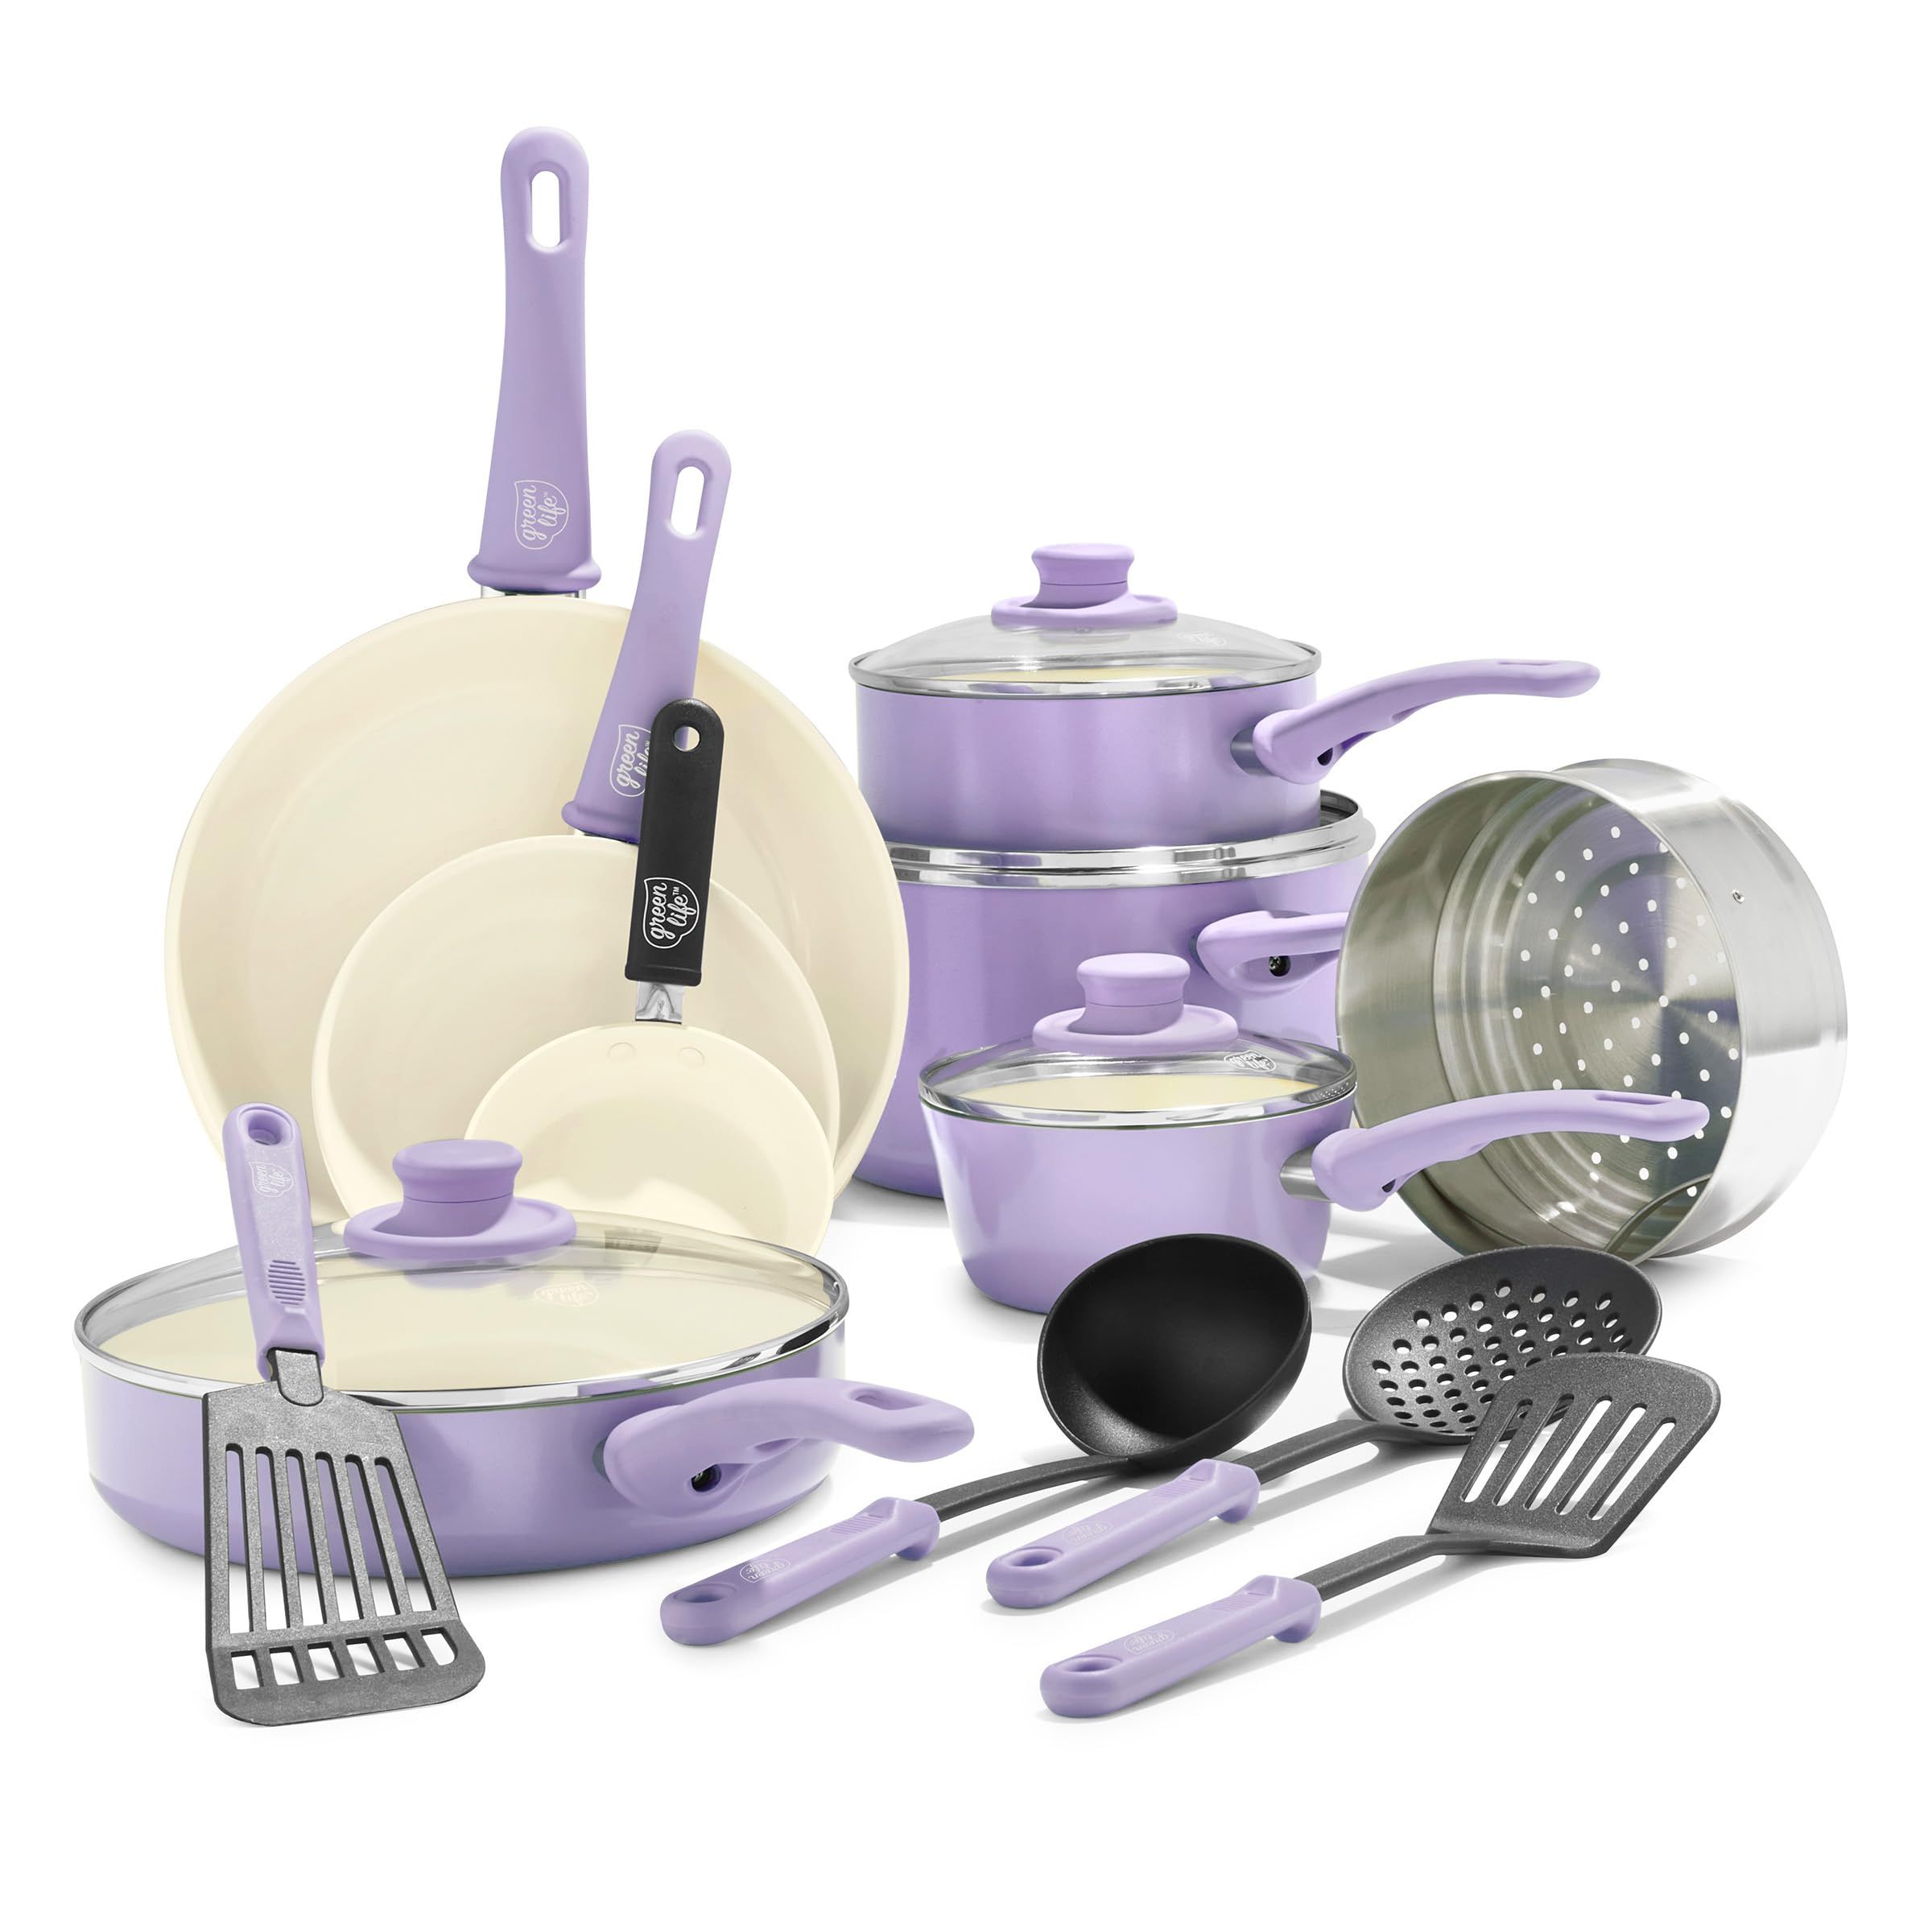 GreenLife Soft Grip Healthy Ceramic Nonstick 16 Piece Kitchen Cookware Pots and Frying Sauce Saute Pans Set, PFAS-Free with Kitchen Utensils and Lid, Dishwasher Safe, Lavender | Amazon (US)